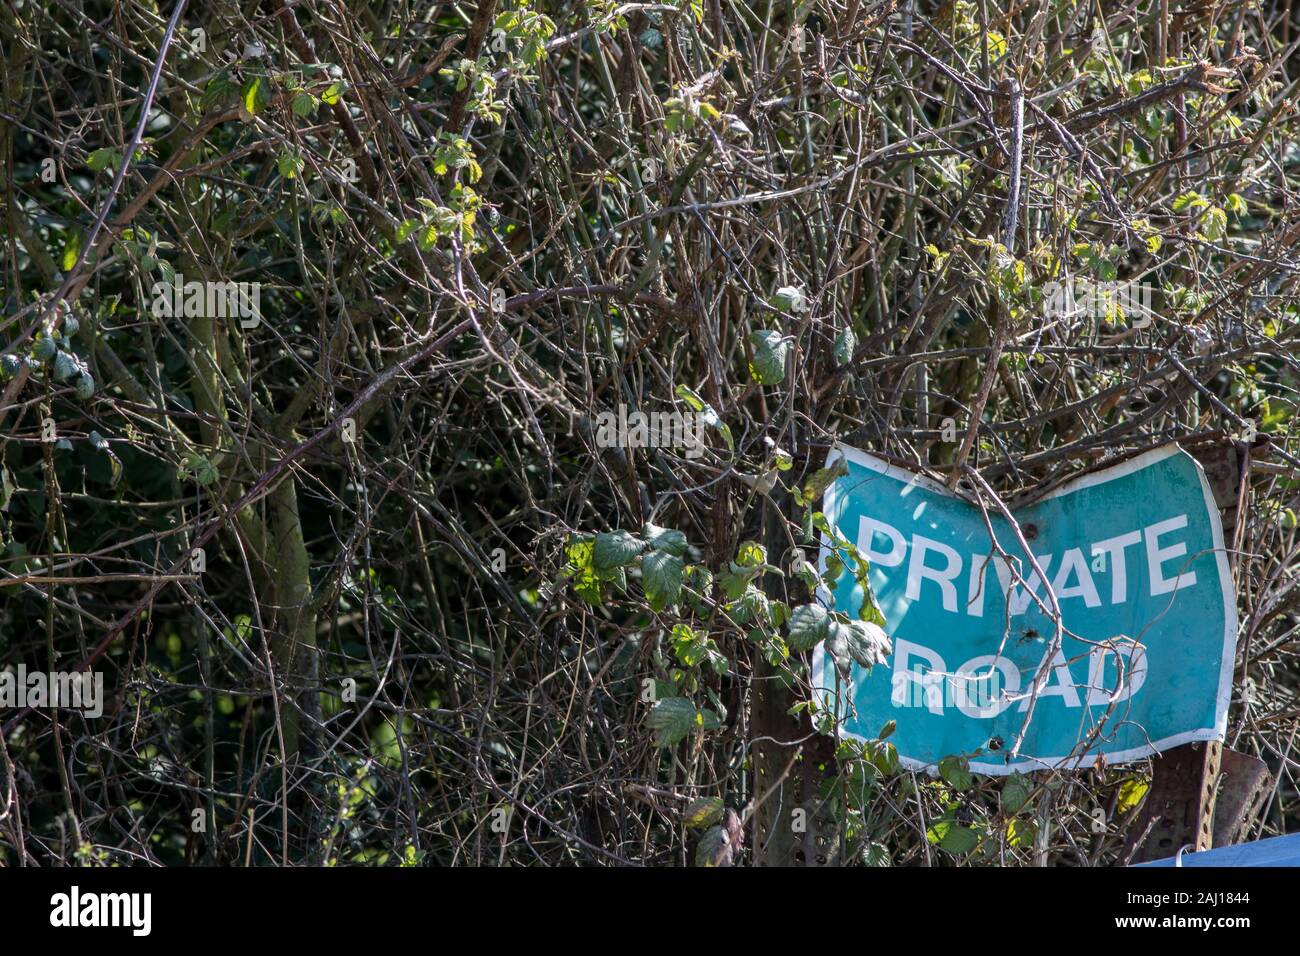 Off the beaten track. Road less travelled. Secluded rural path private road sign in overgrown hedge row. Isolated pathway to mysterious country reside Stock Photo